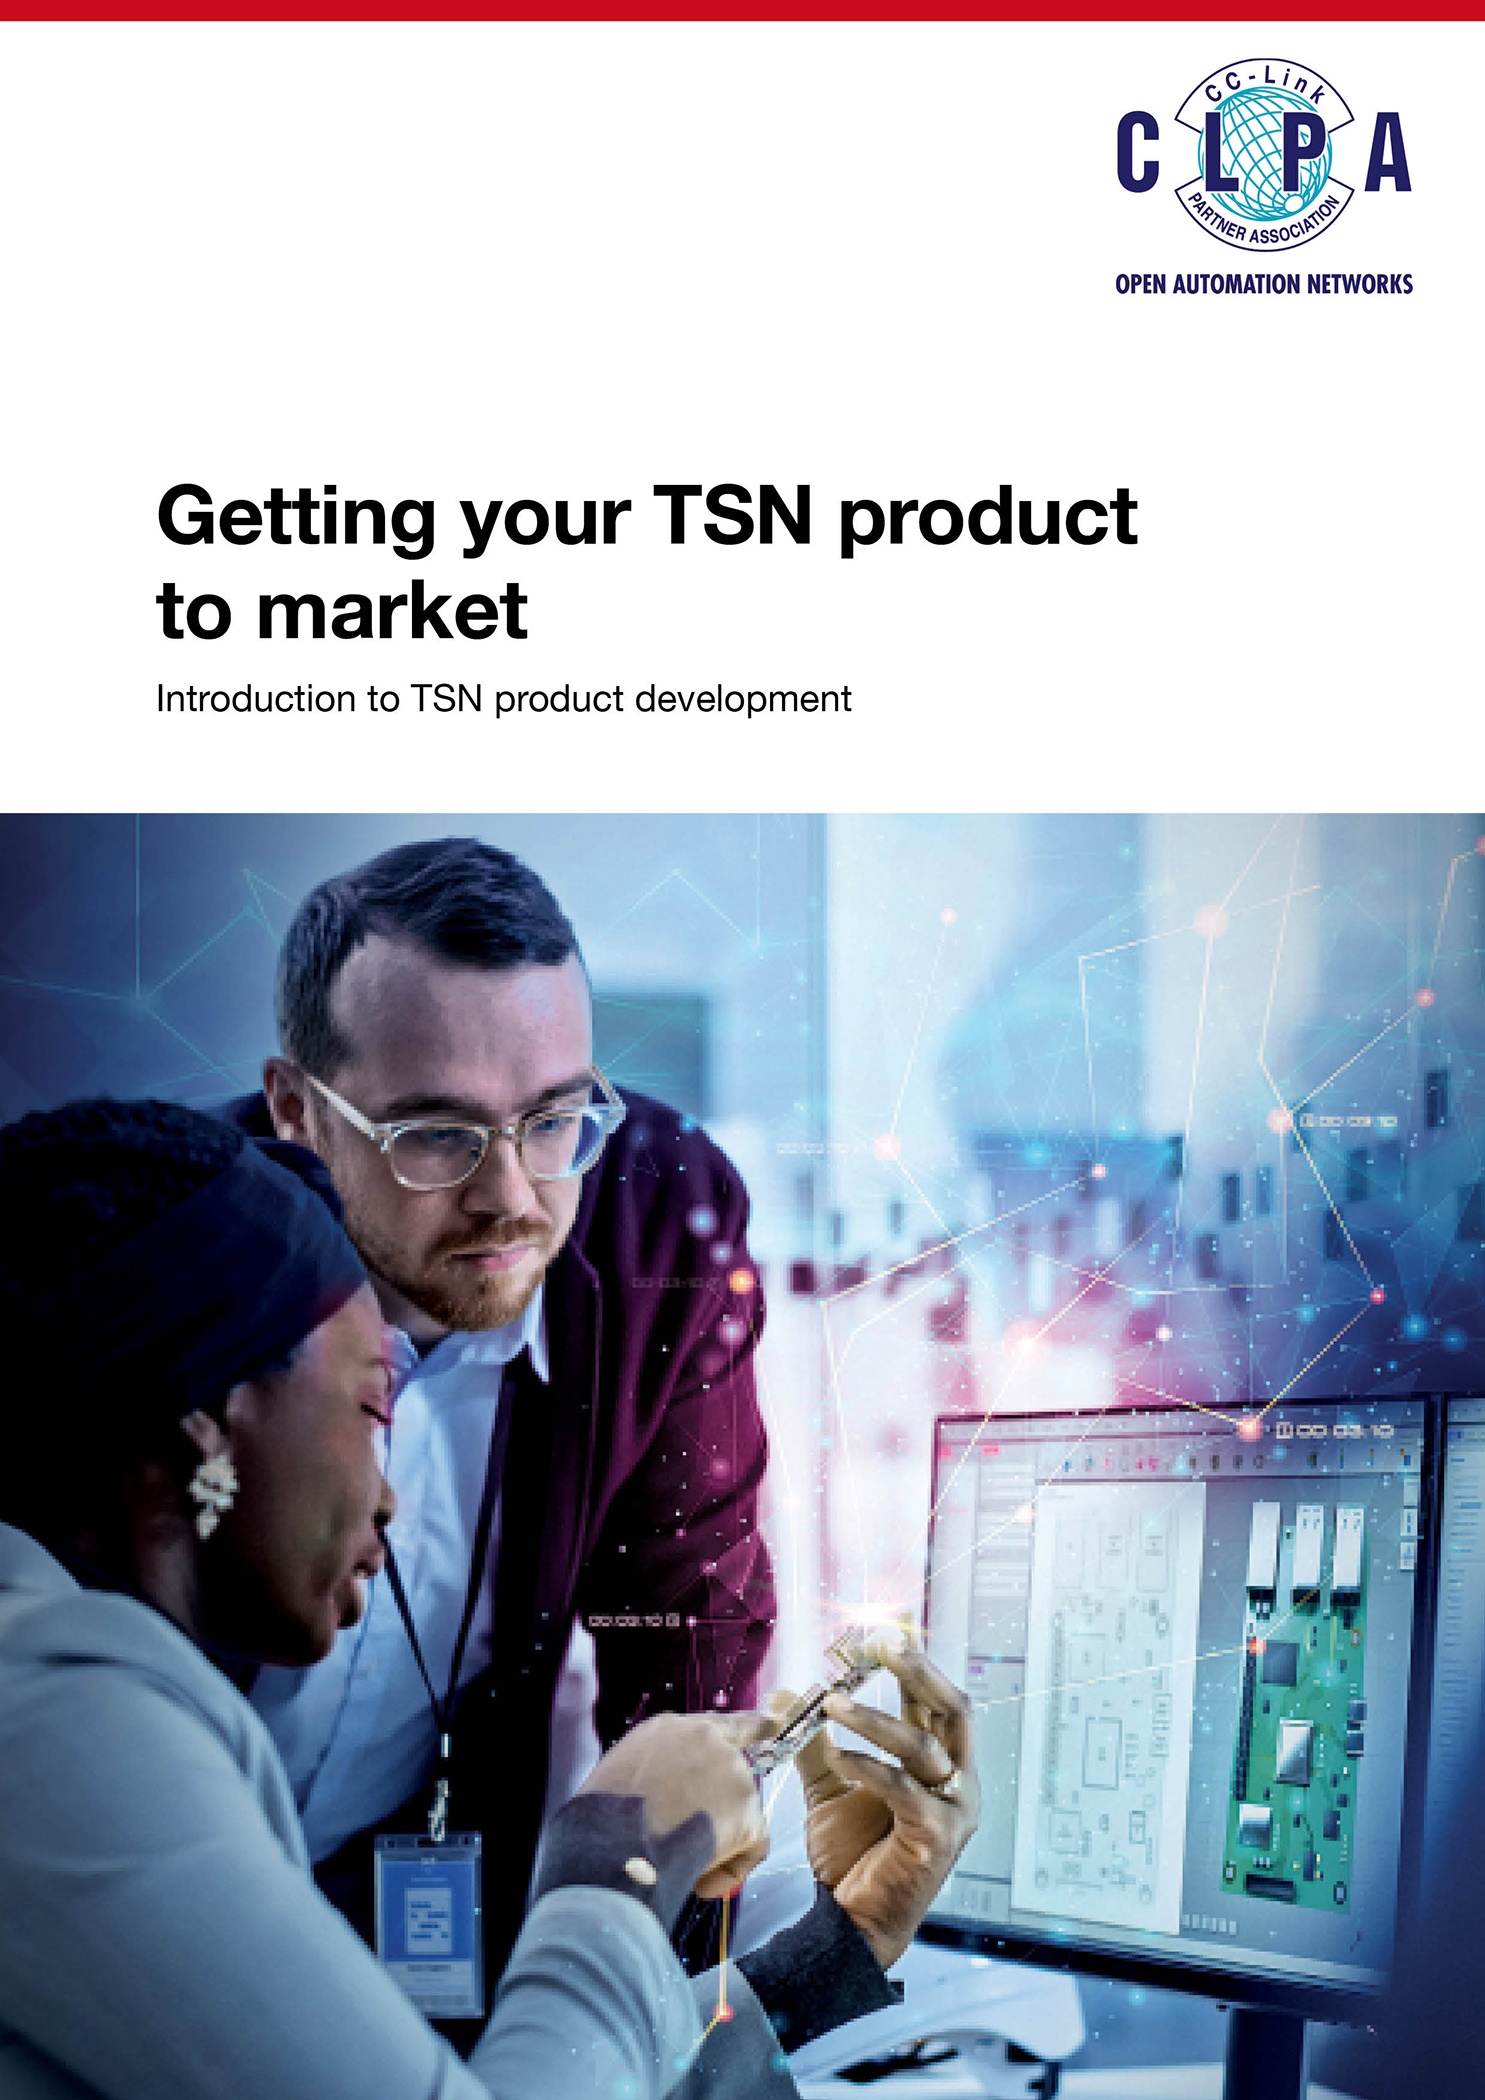 “Getting your TSN product to market”